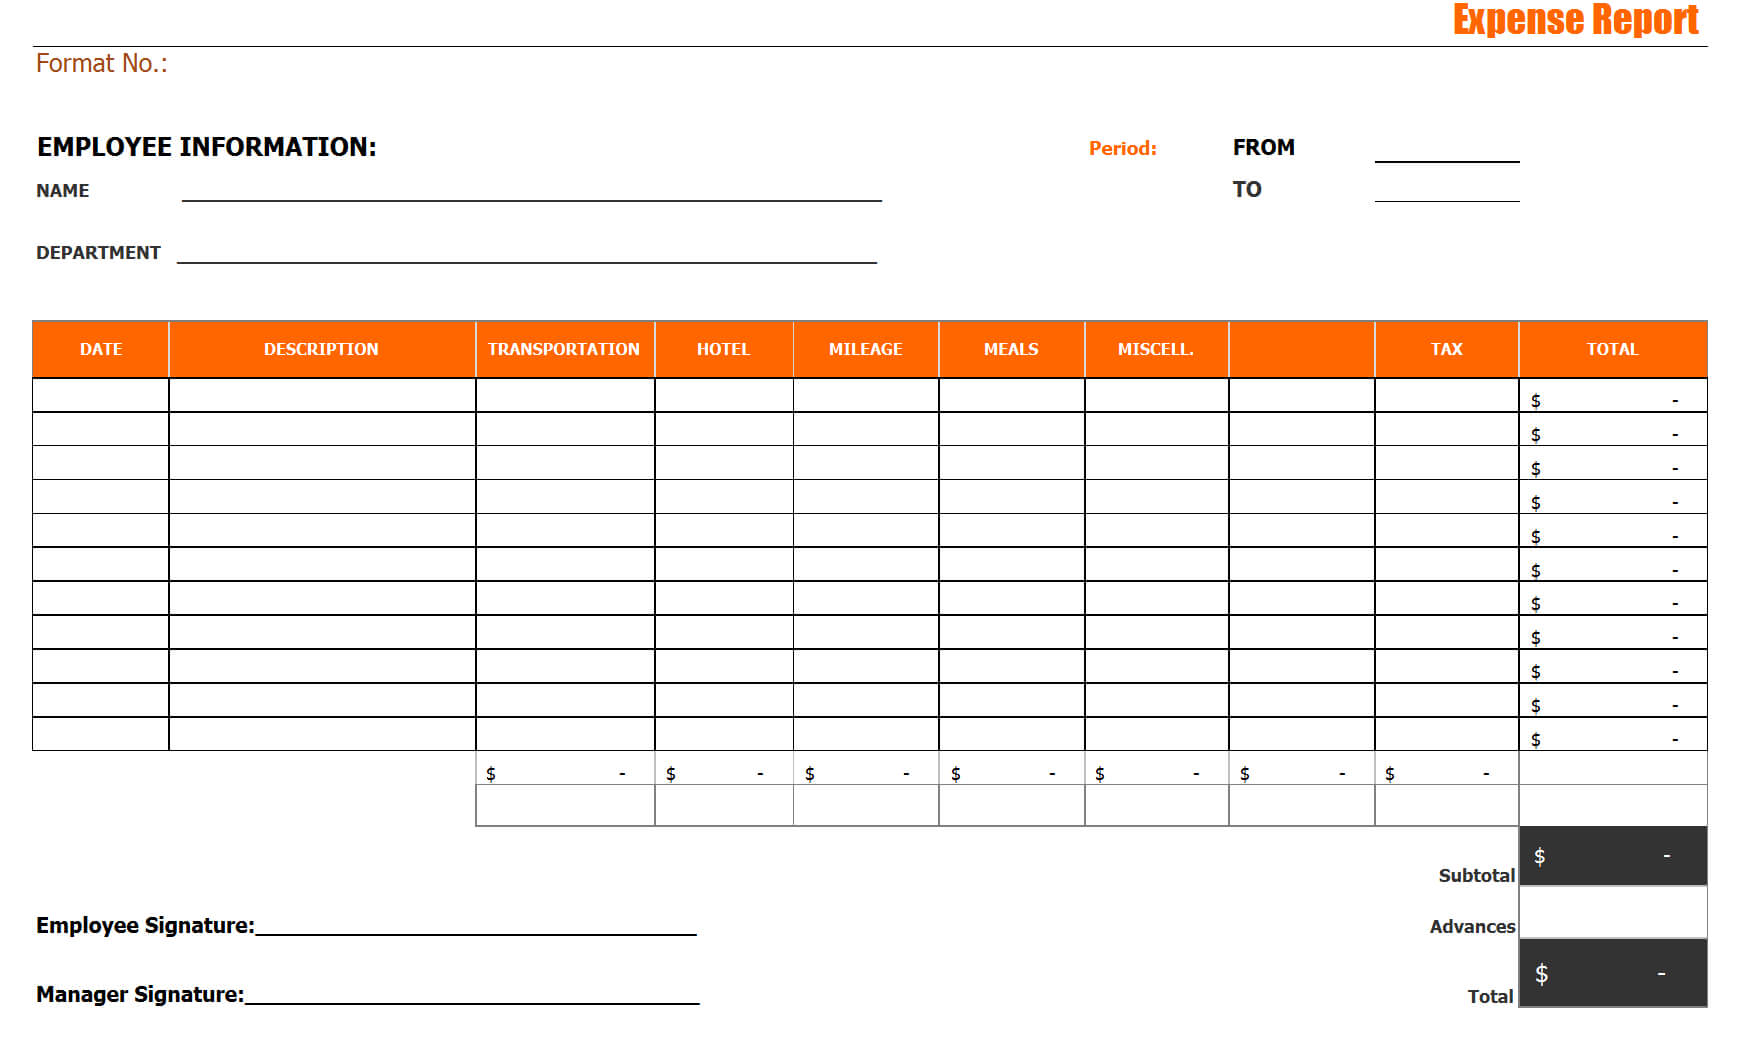 025 Expenses Report Template Excel Expense Magnificent Ideas Inside Expense Report Template Excel 2010